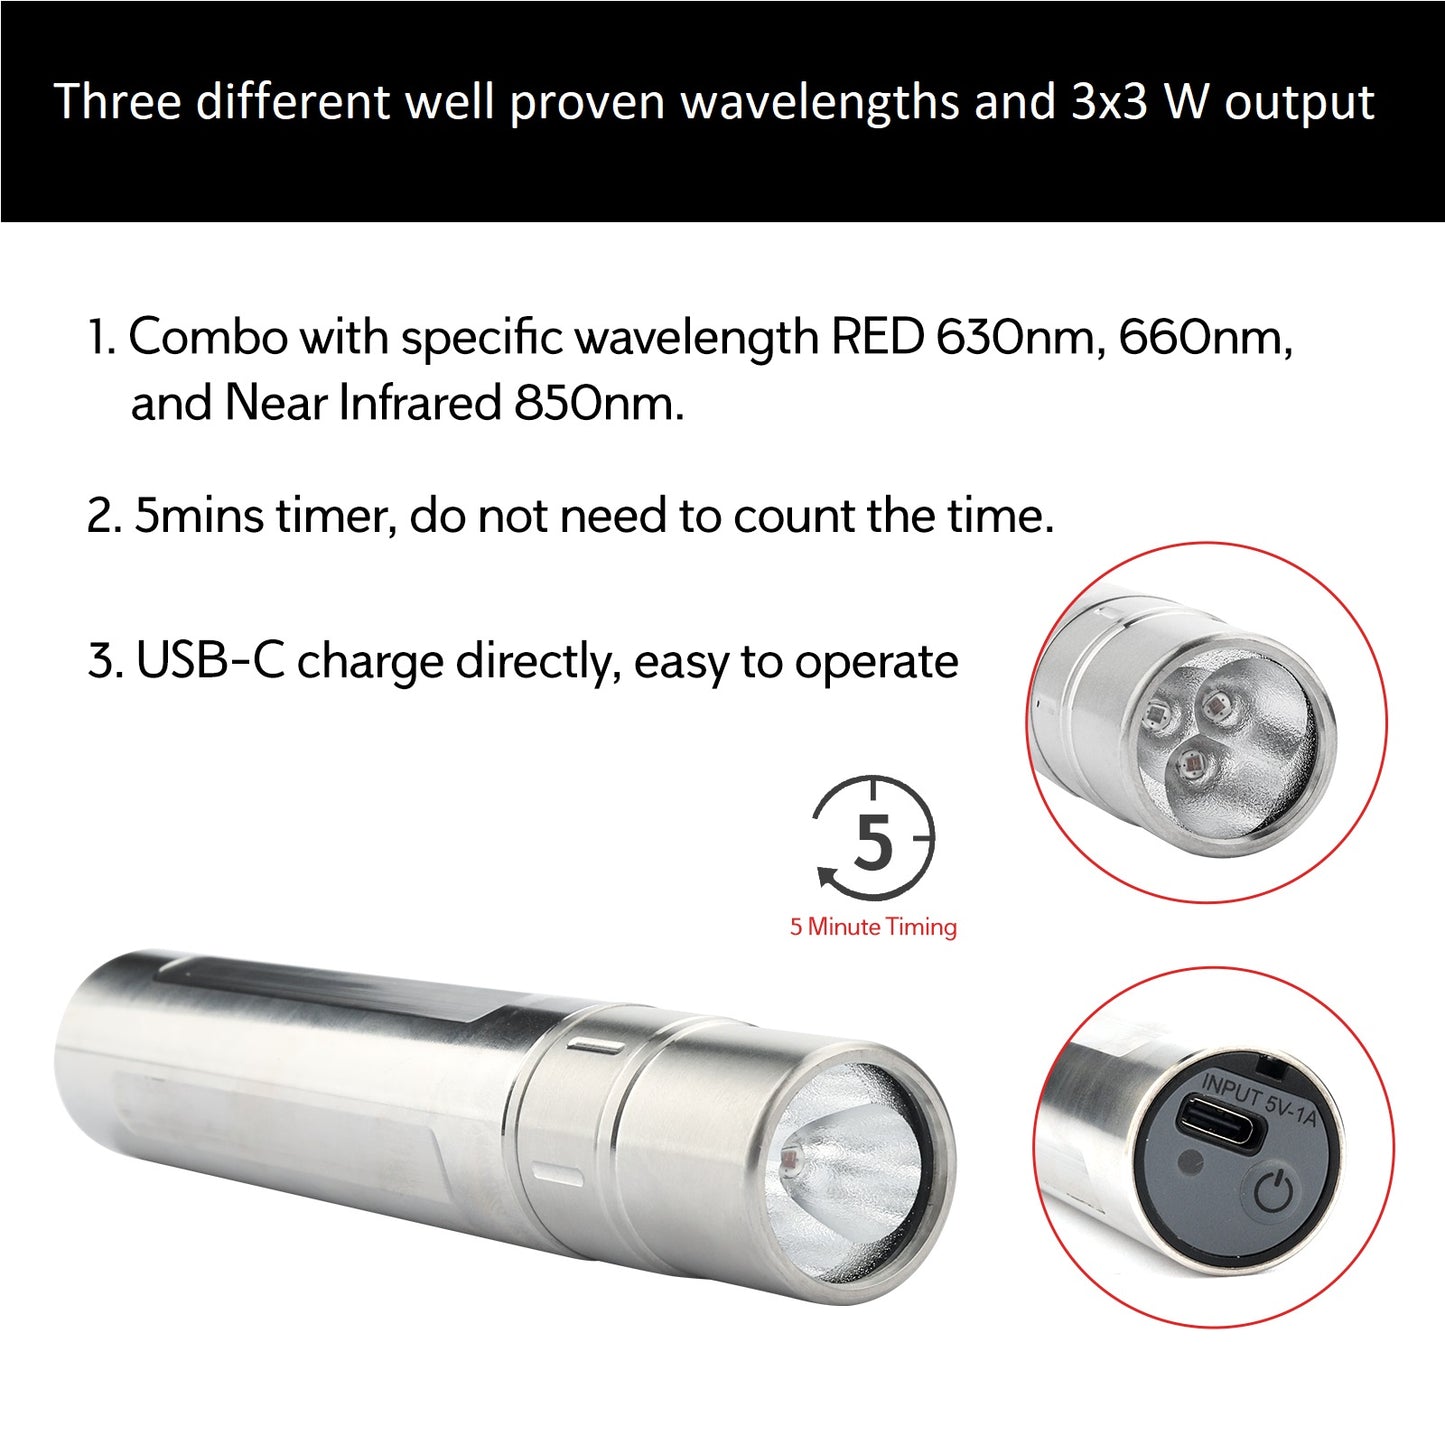 LED-LLLT/LED light therapy pen 3x3 W